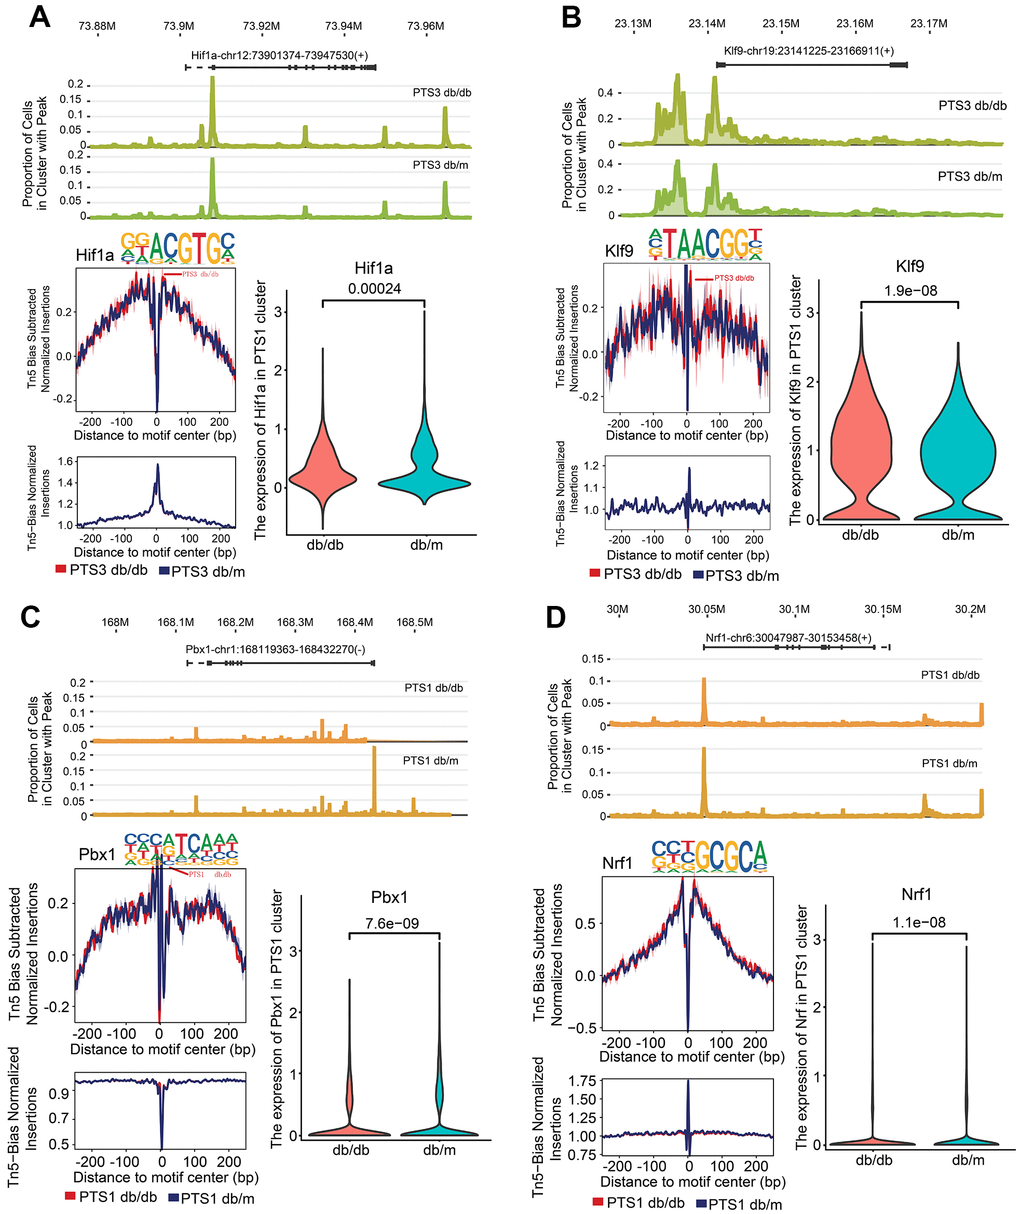 Kidney injury-related transcription factor (TF) analysis in the PTS1 and PTS3 clusters. (A) Peak distribution, footprinting, and expression of Hif1a in the PTS3 cluster of db/db and db/m mice. (B) Peak distribution, footprinting, and expression of Klf9 in the PTS3 cluster of db/db and db/m mice. (C) Peak distribution, footprinting, and expression of Pbx1 in the PTS1 cluster of db/db and db/m mice. (D) Peak distribution, footprinting, and expression of Nrf1 in the PTS1 cluster of db/db and db/m mice.